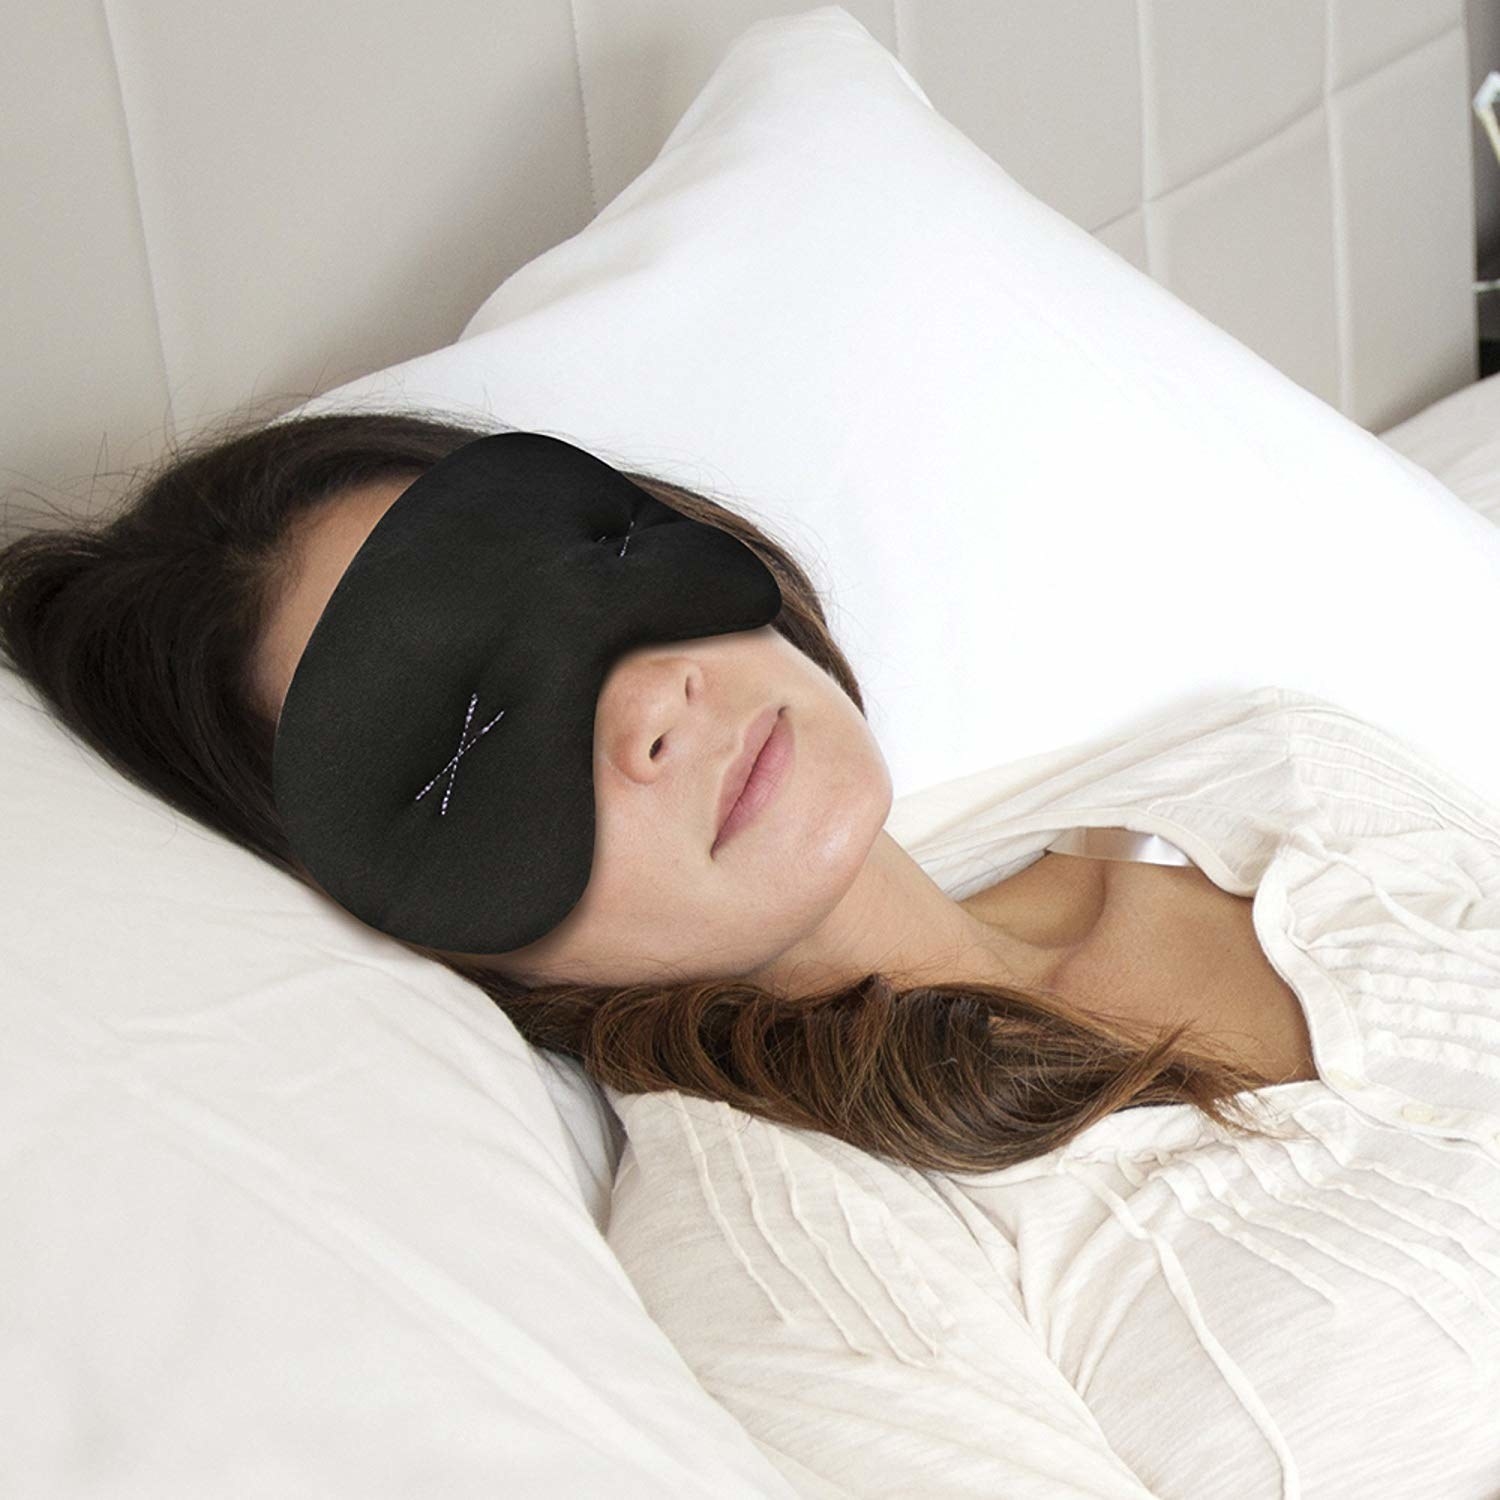 person sleeping while wearing the eye mask